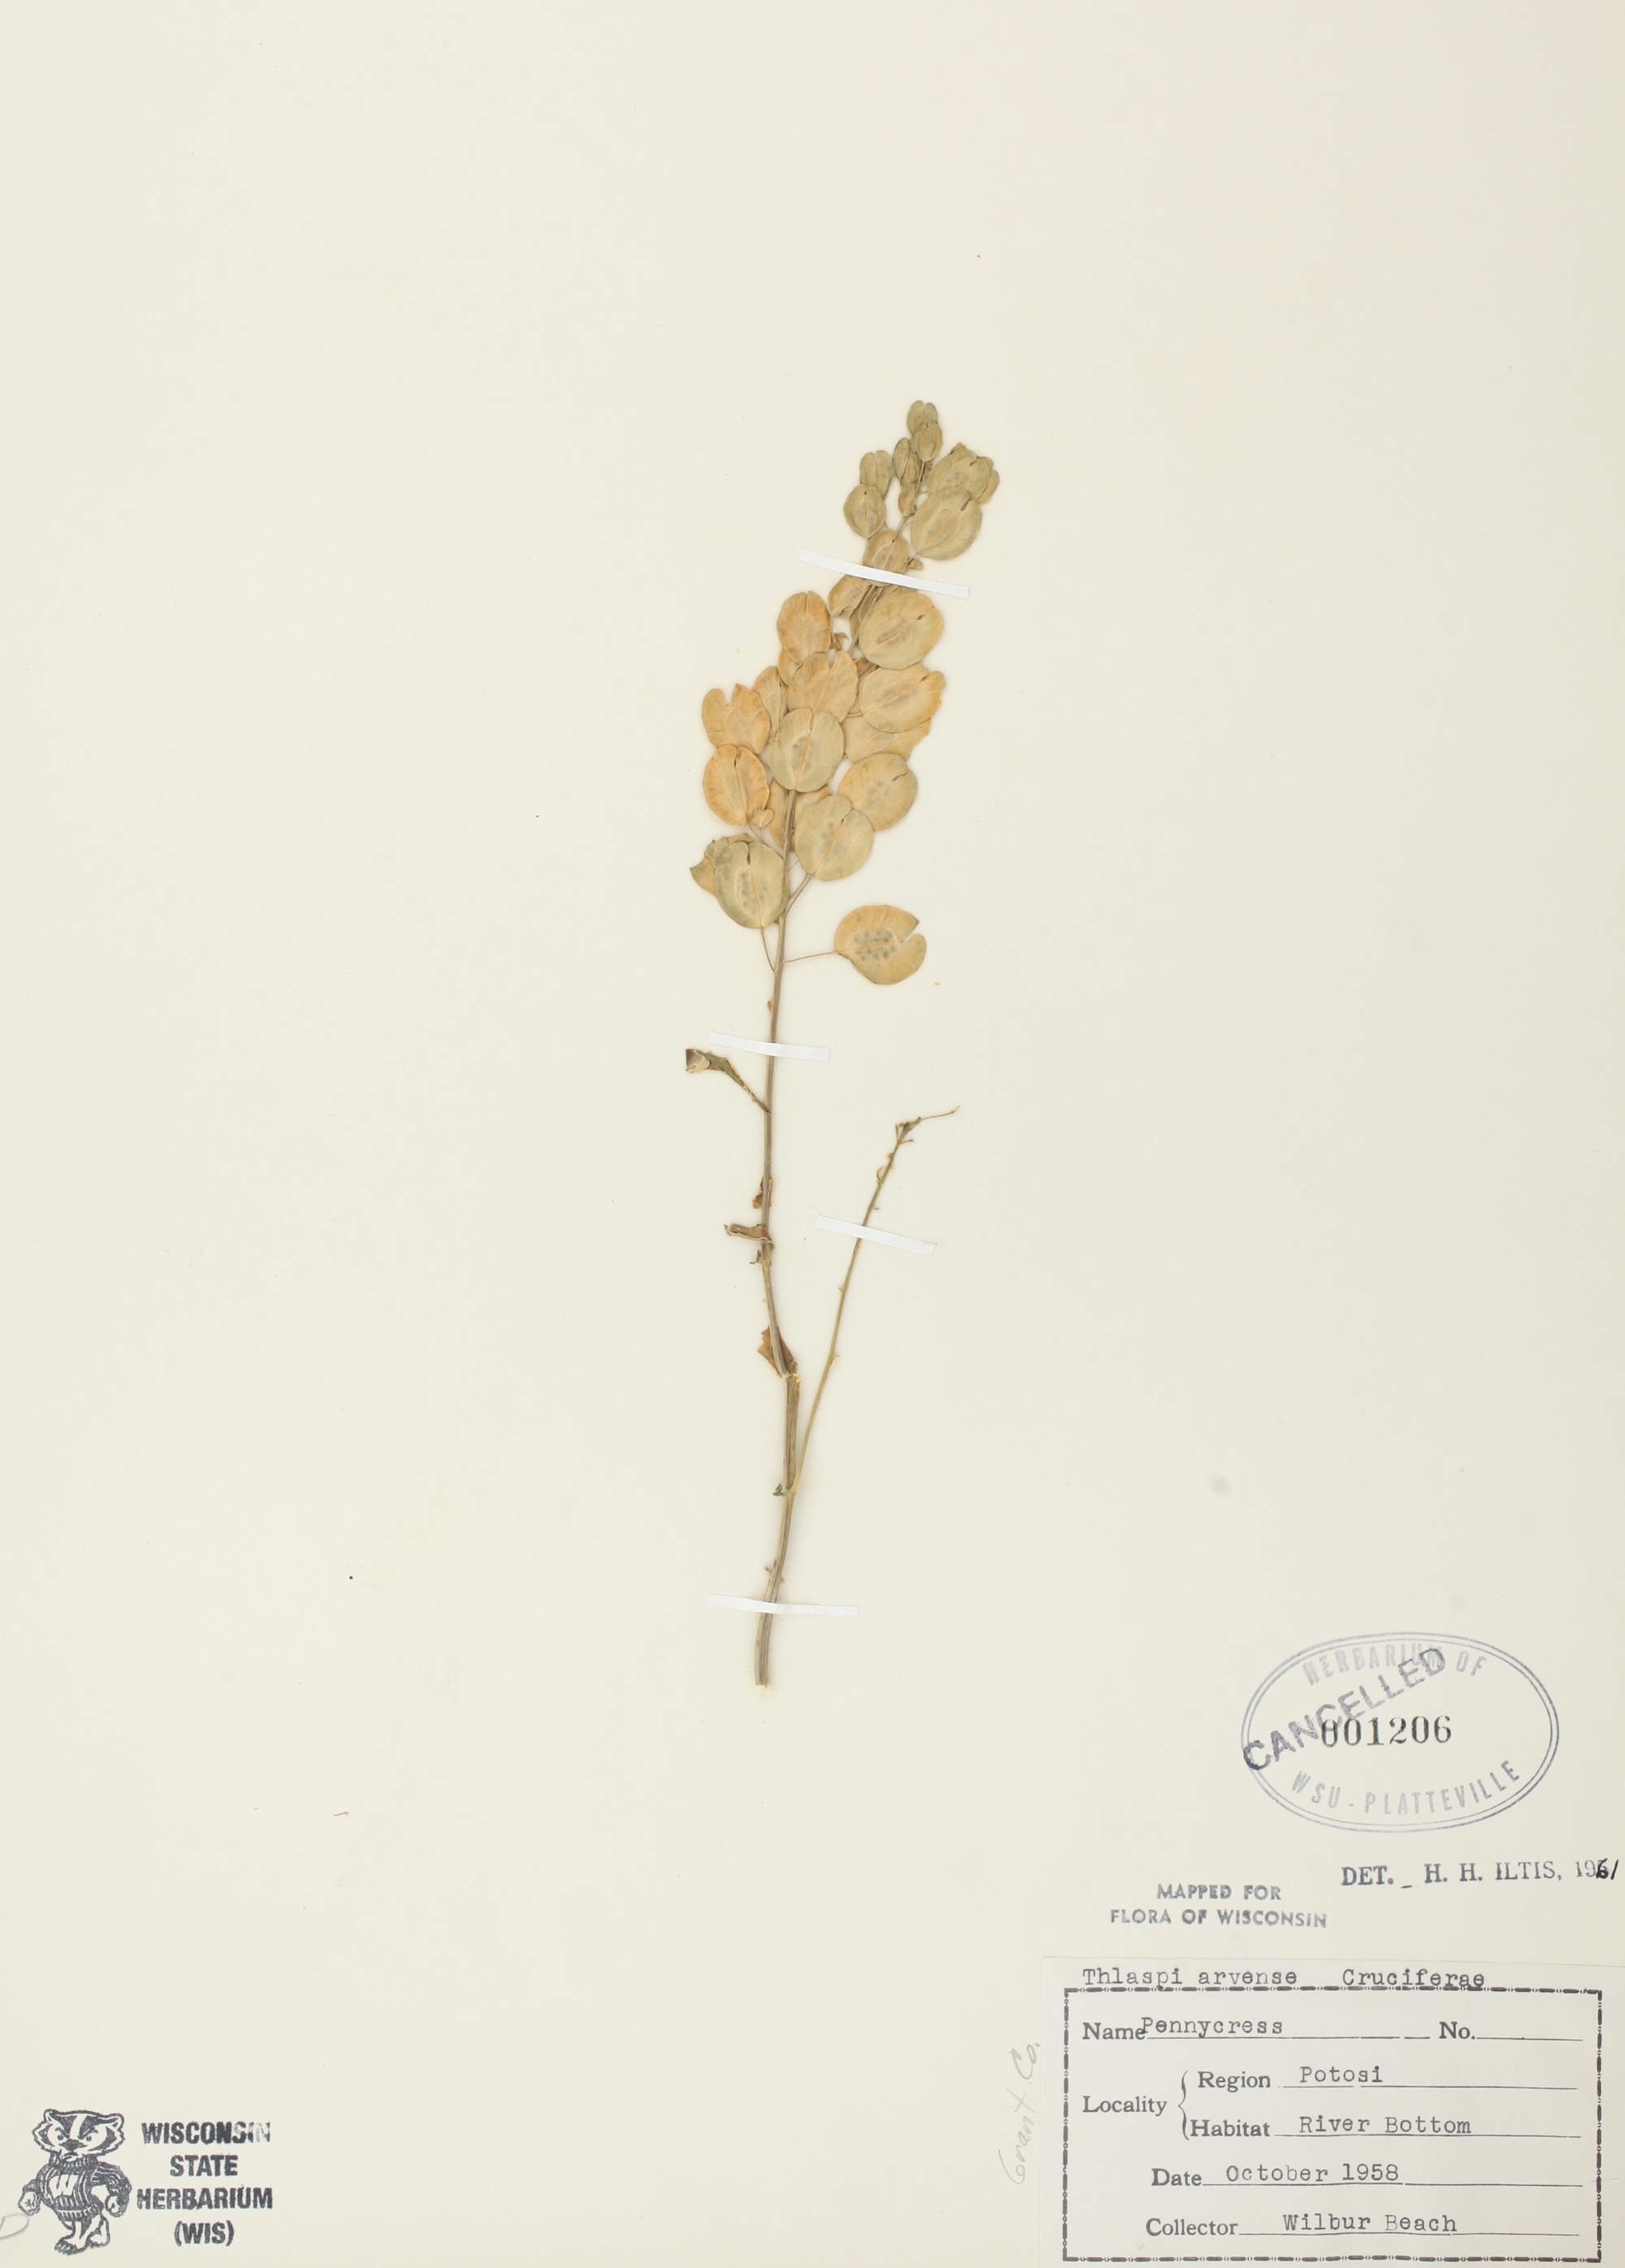 Field Pennycress specimen collected on October 1958 near Potosi, Wisconsin.